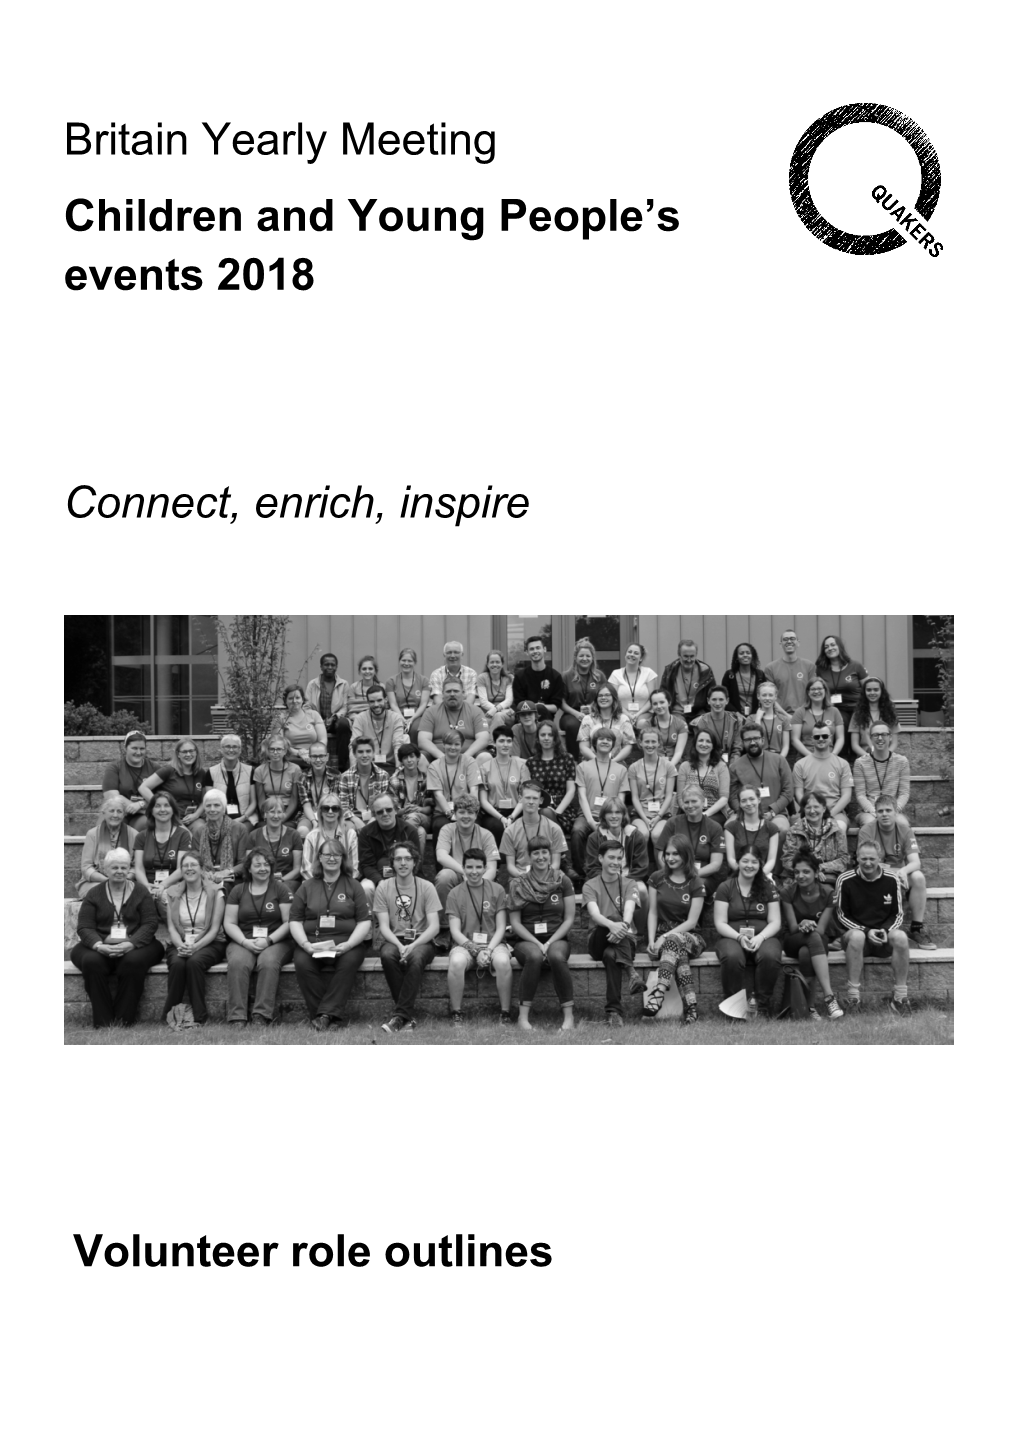 Britain Yearly Meeting Children and Young People's Events 2018